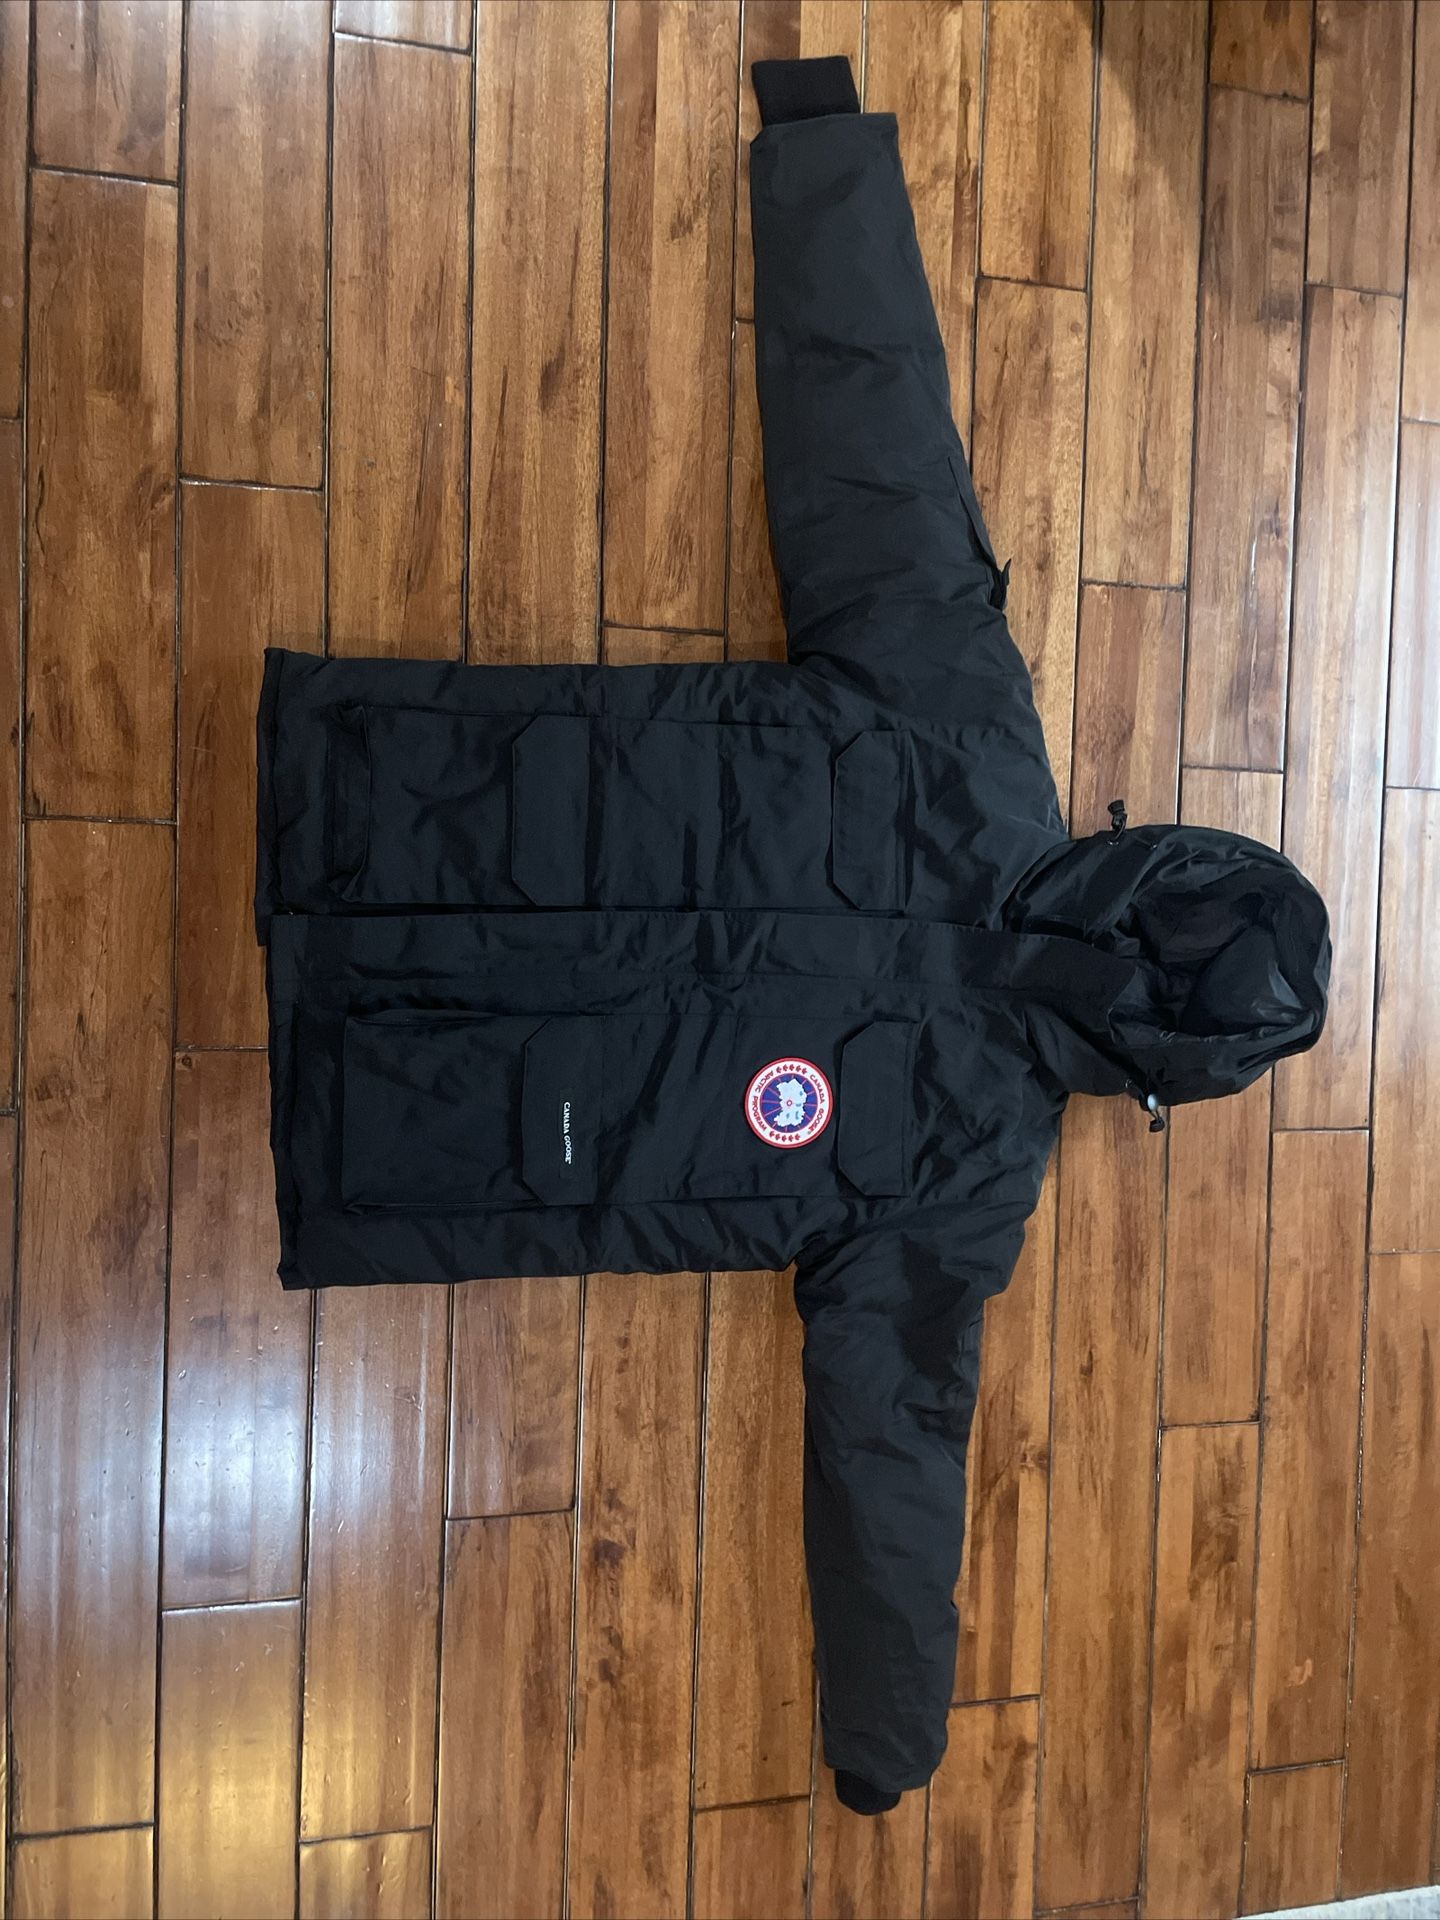 Canada Goose Expedition Parka Size Large (Authentic And Receipt Available)